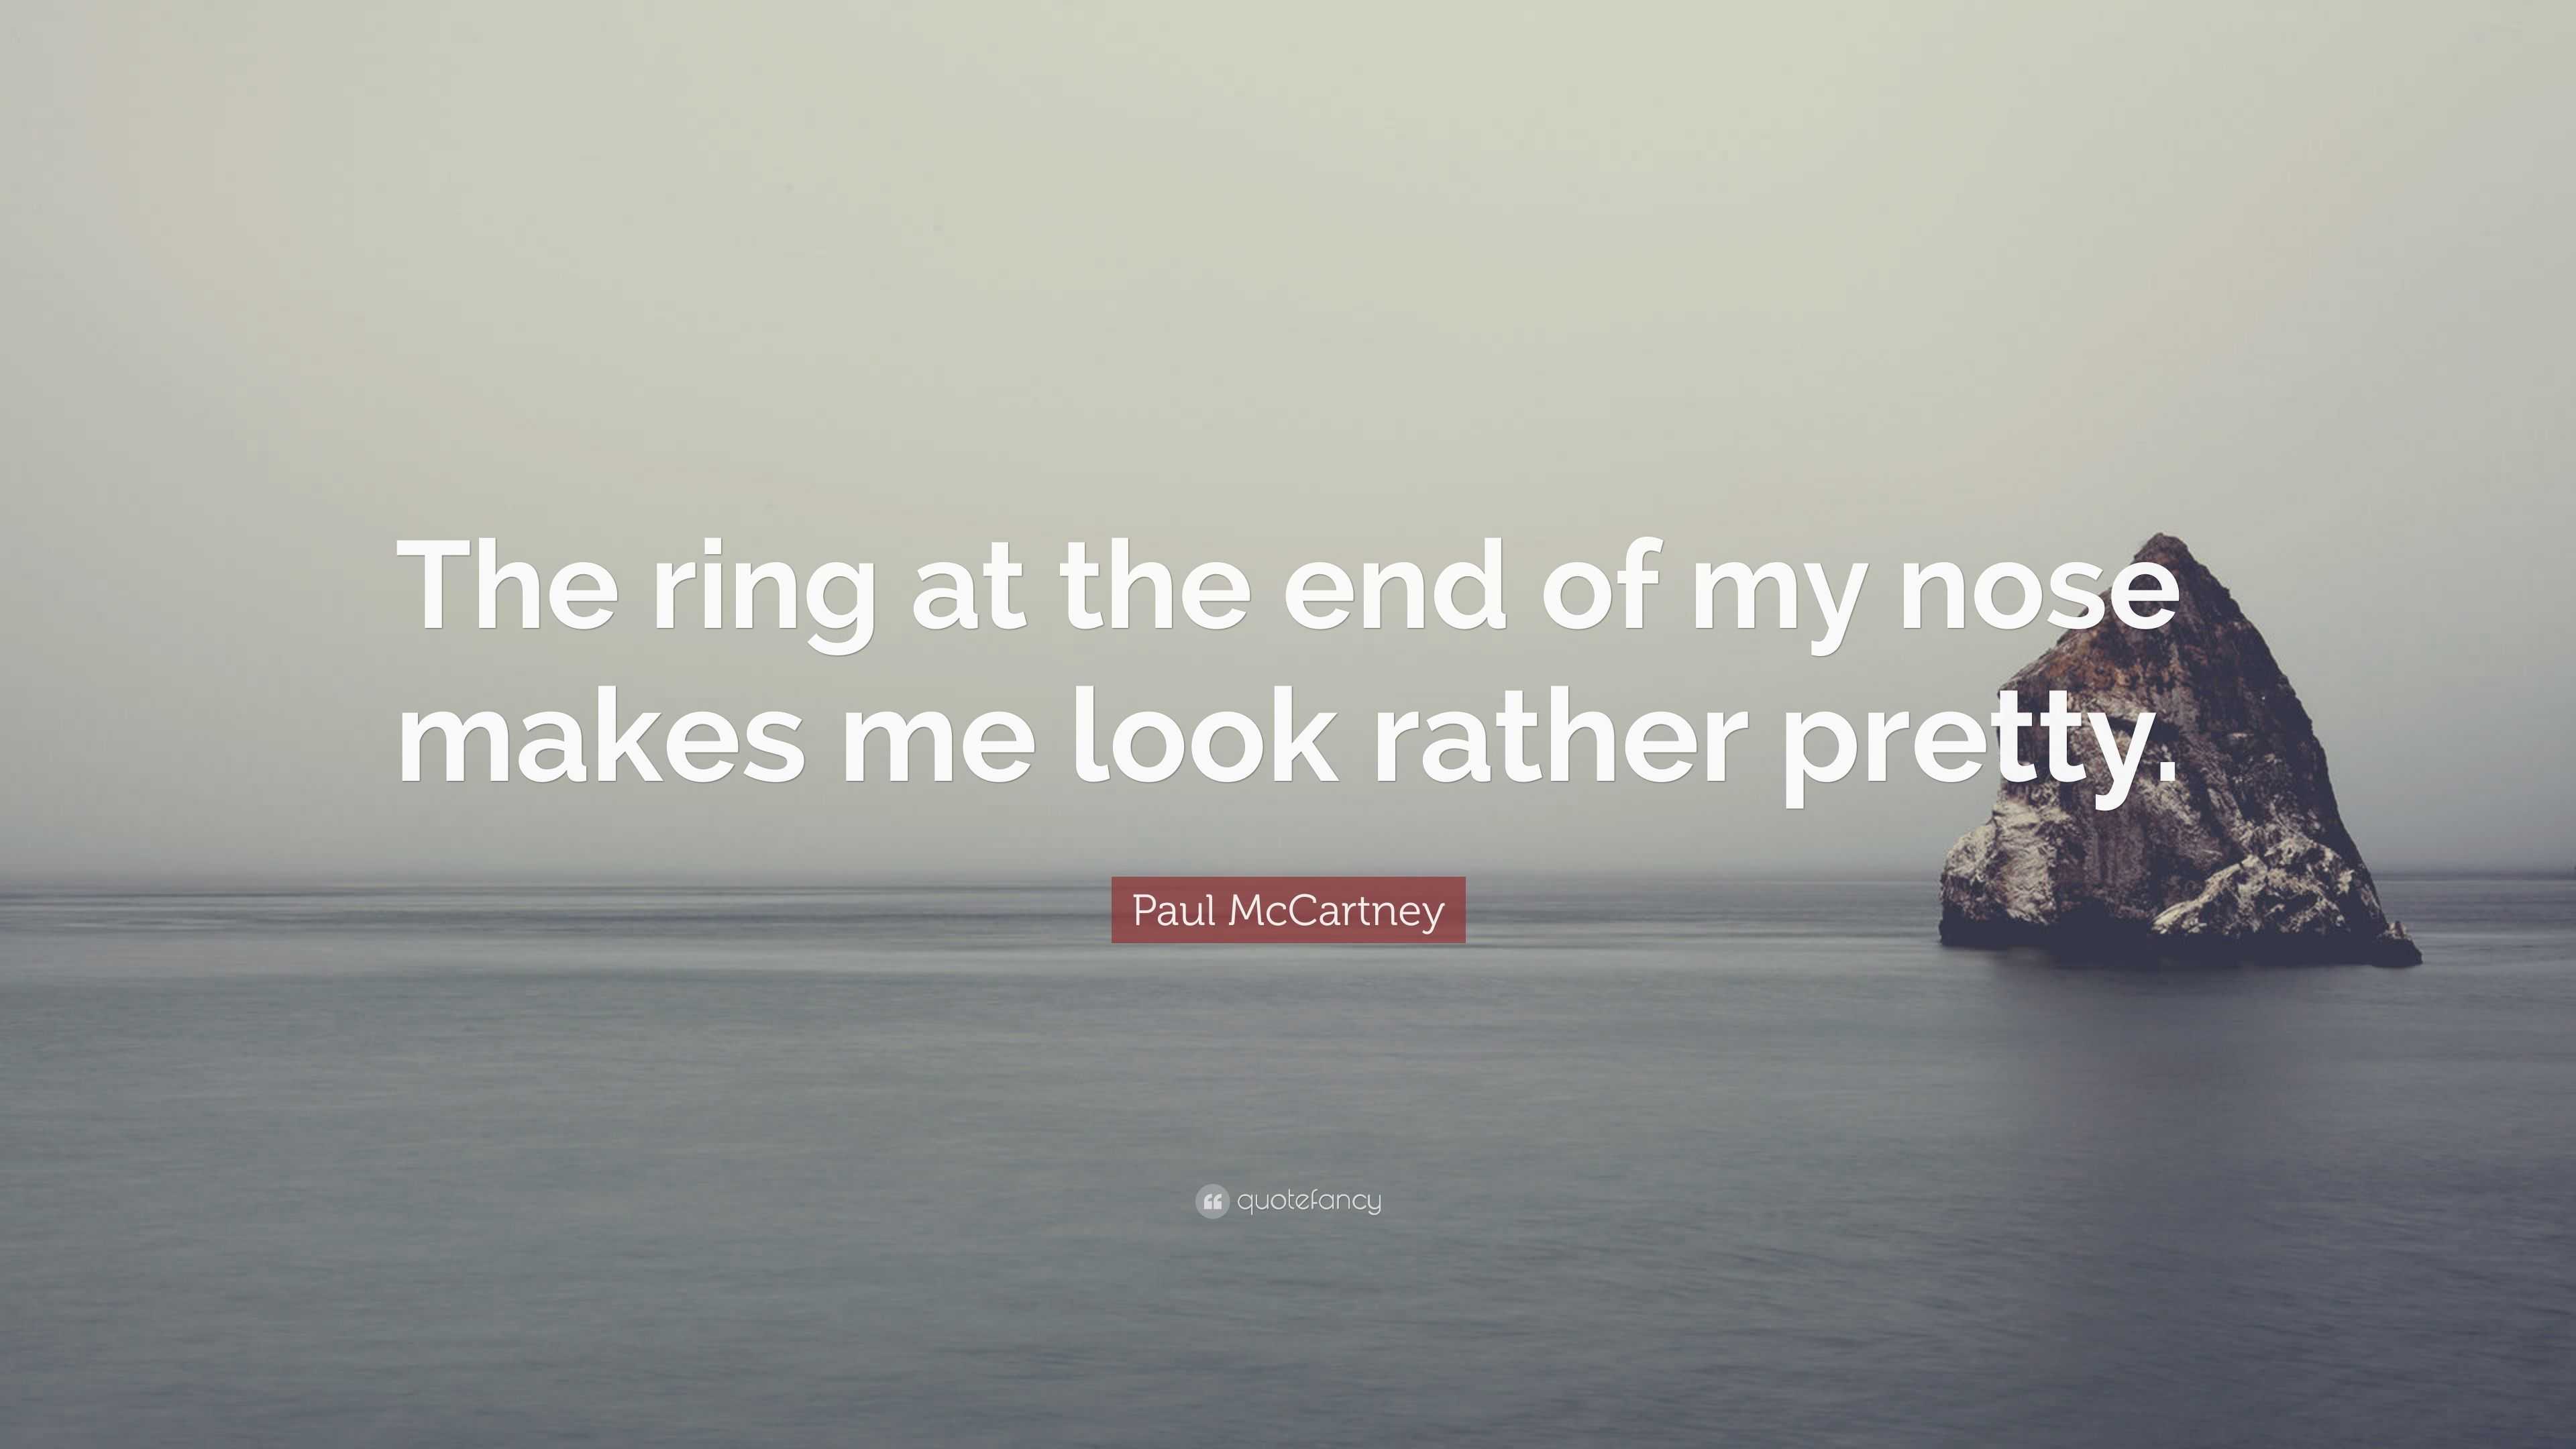 4950301 Paul McCartney Quote The ring at the end of my nose makes me look